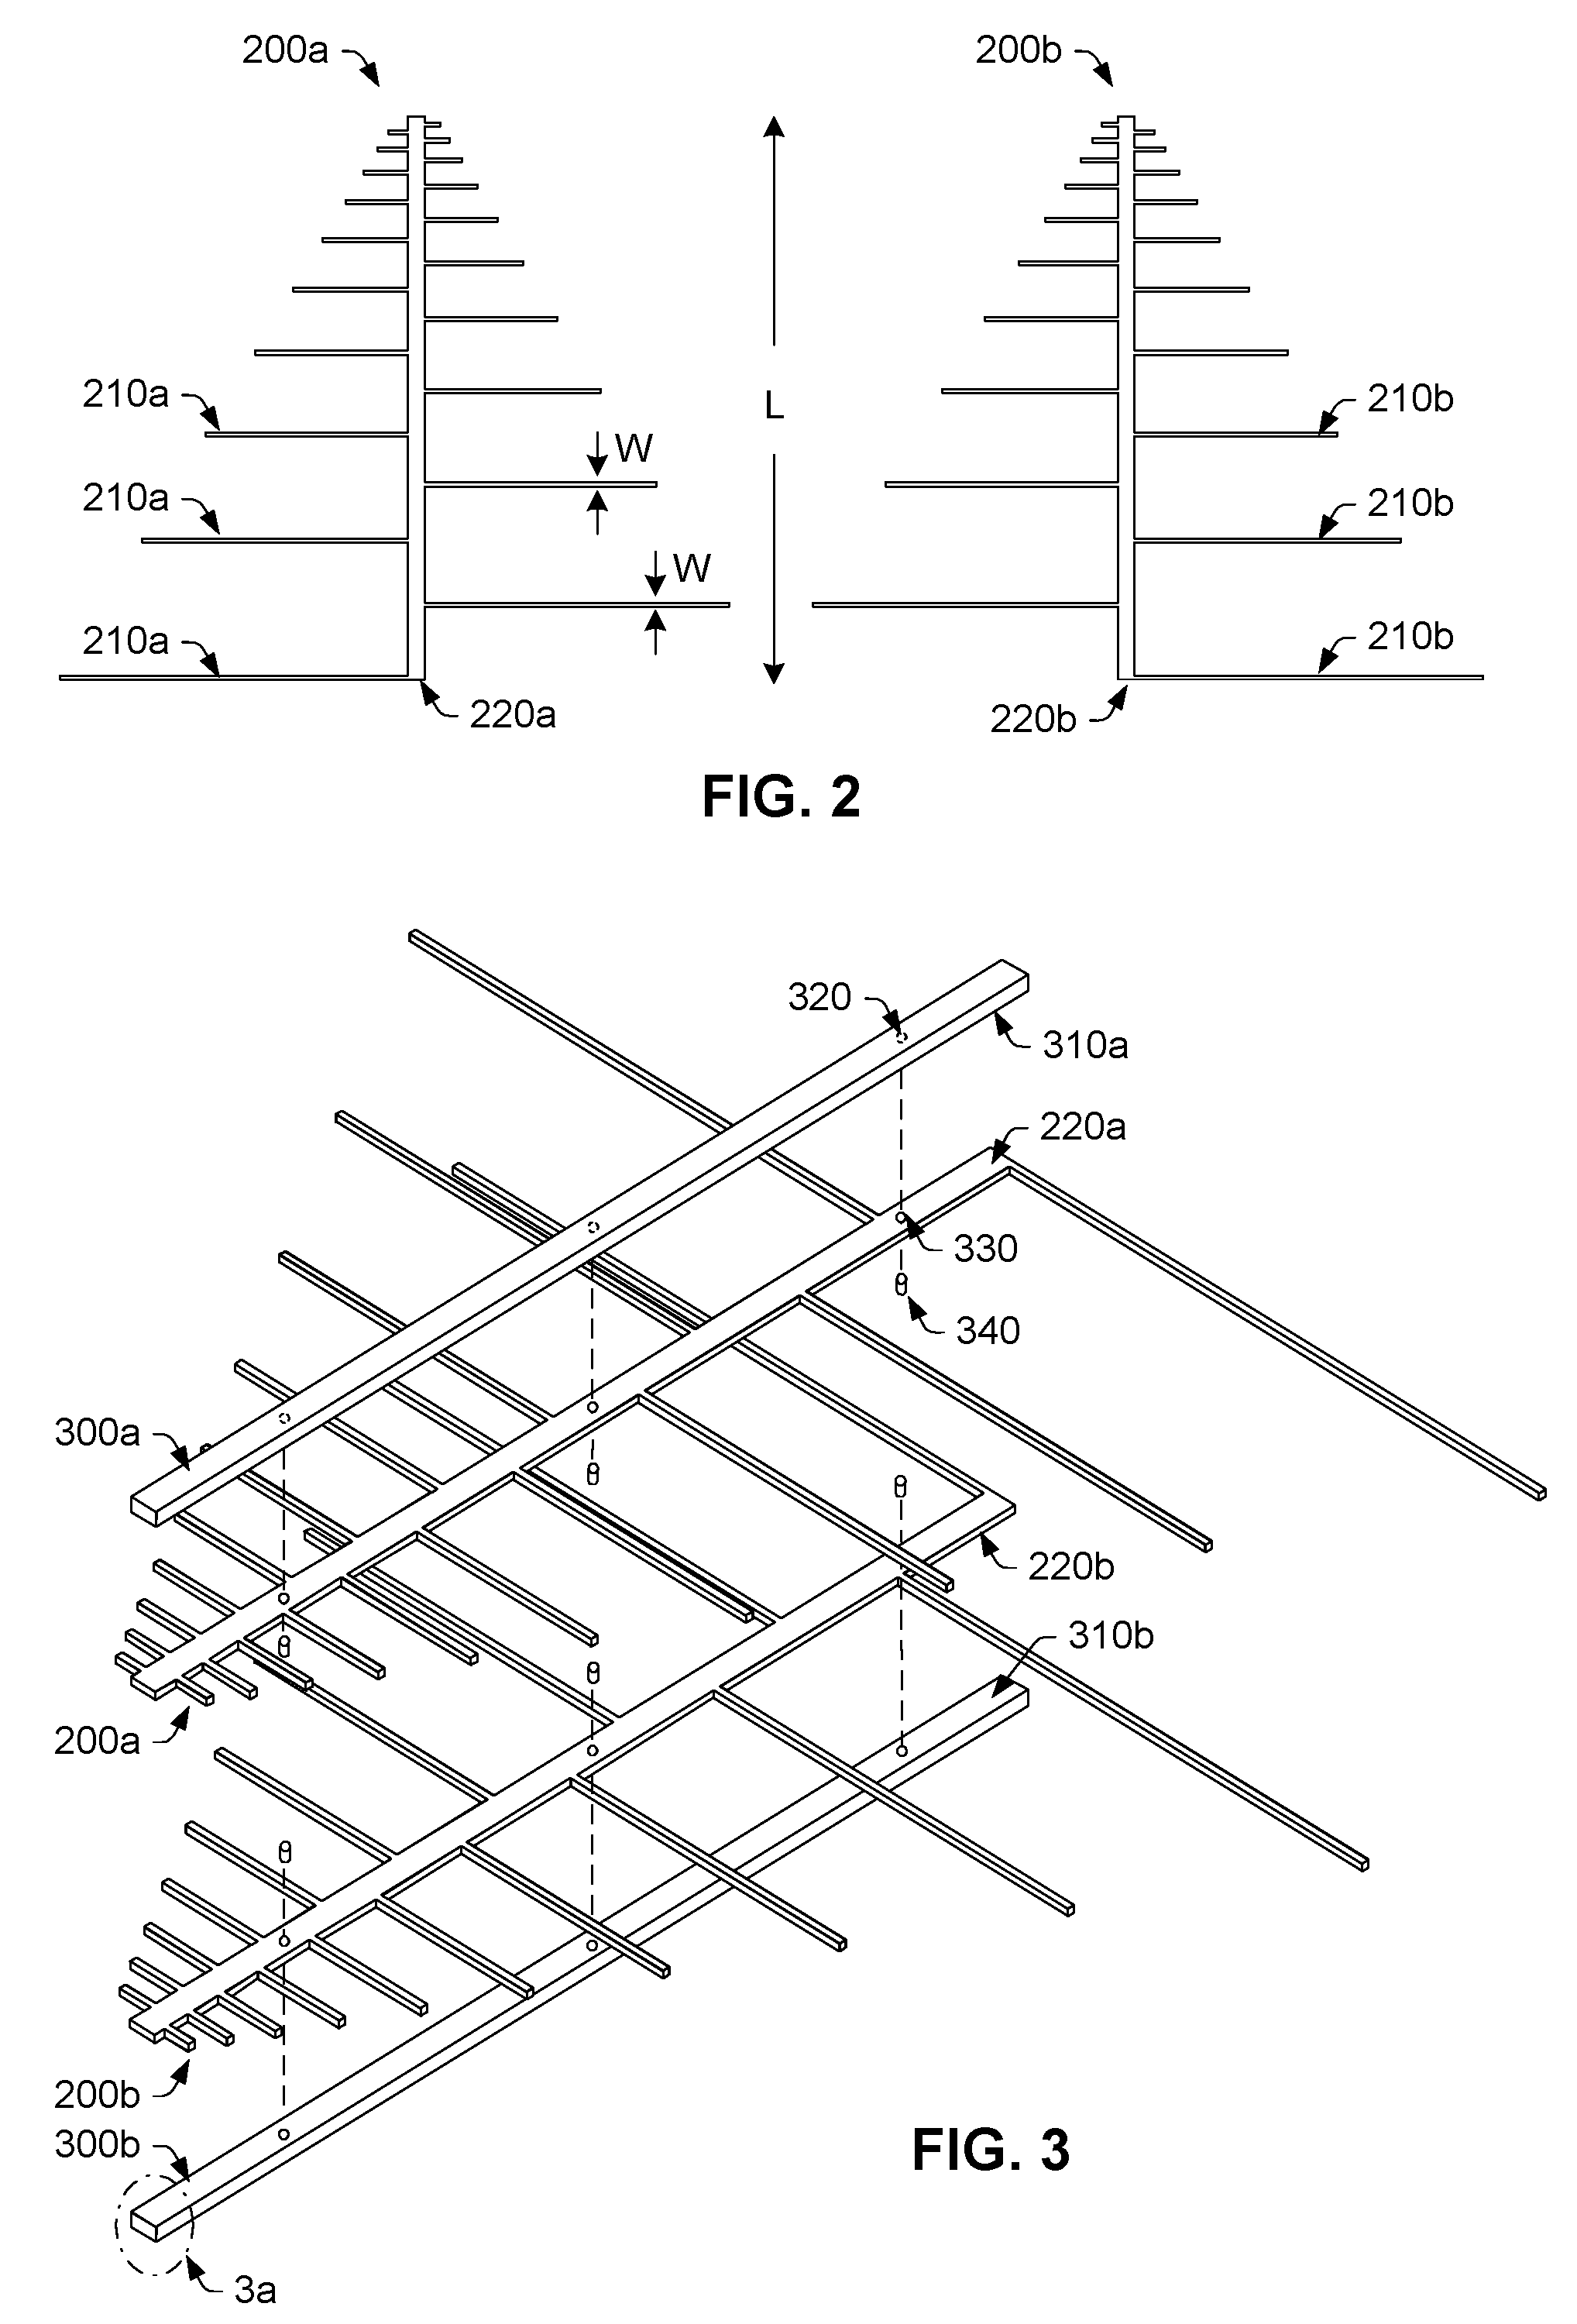 Log-Periodic Dipole Array (LPDA) Antenna and Method of Making